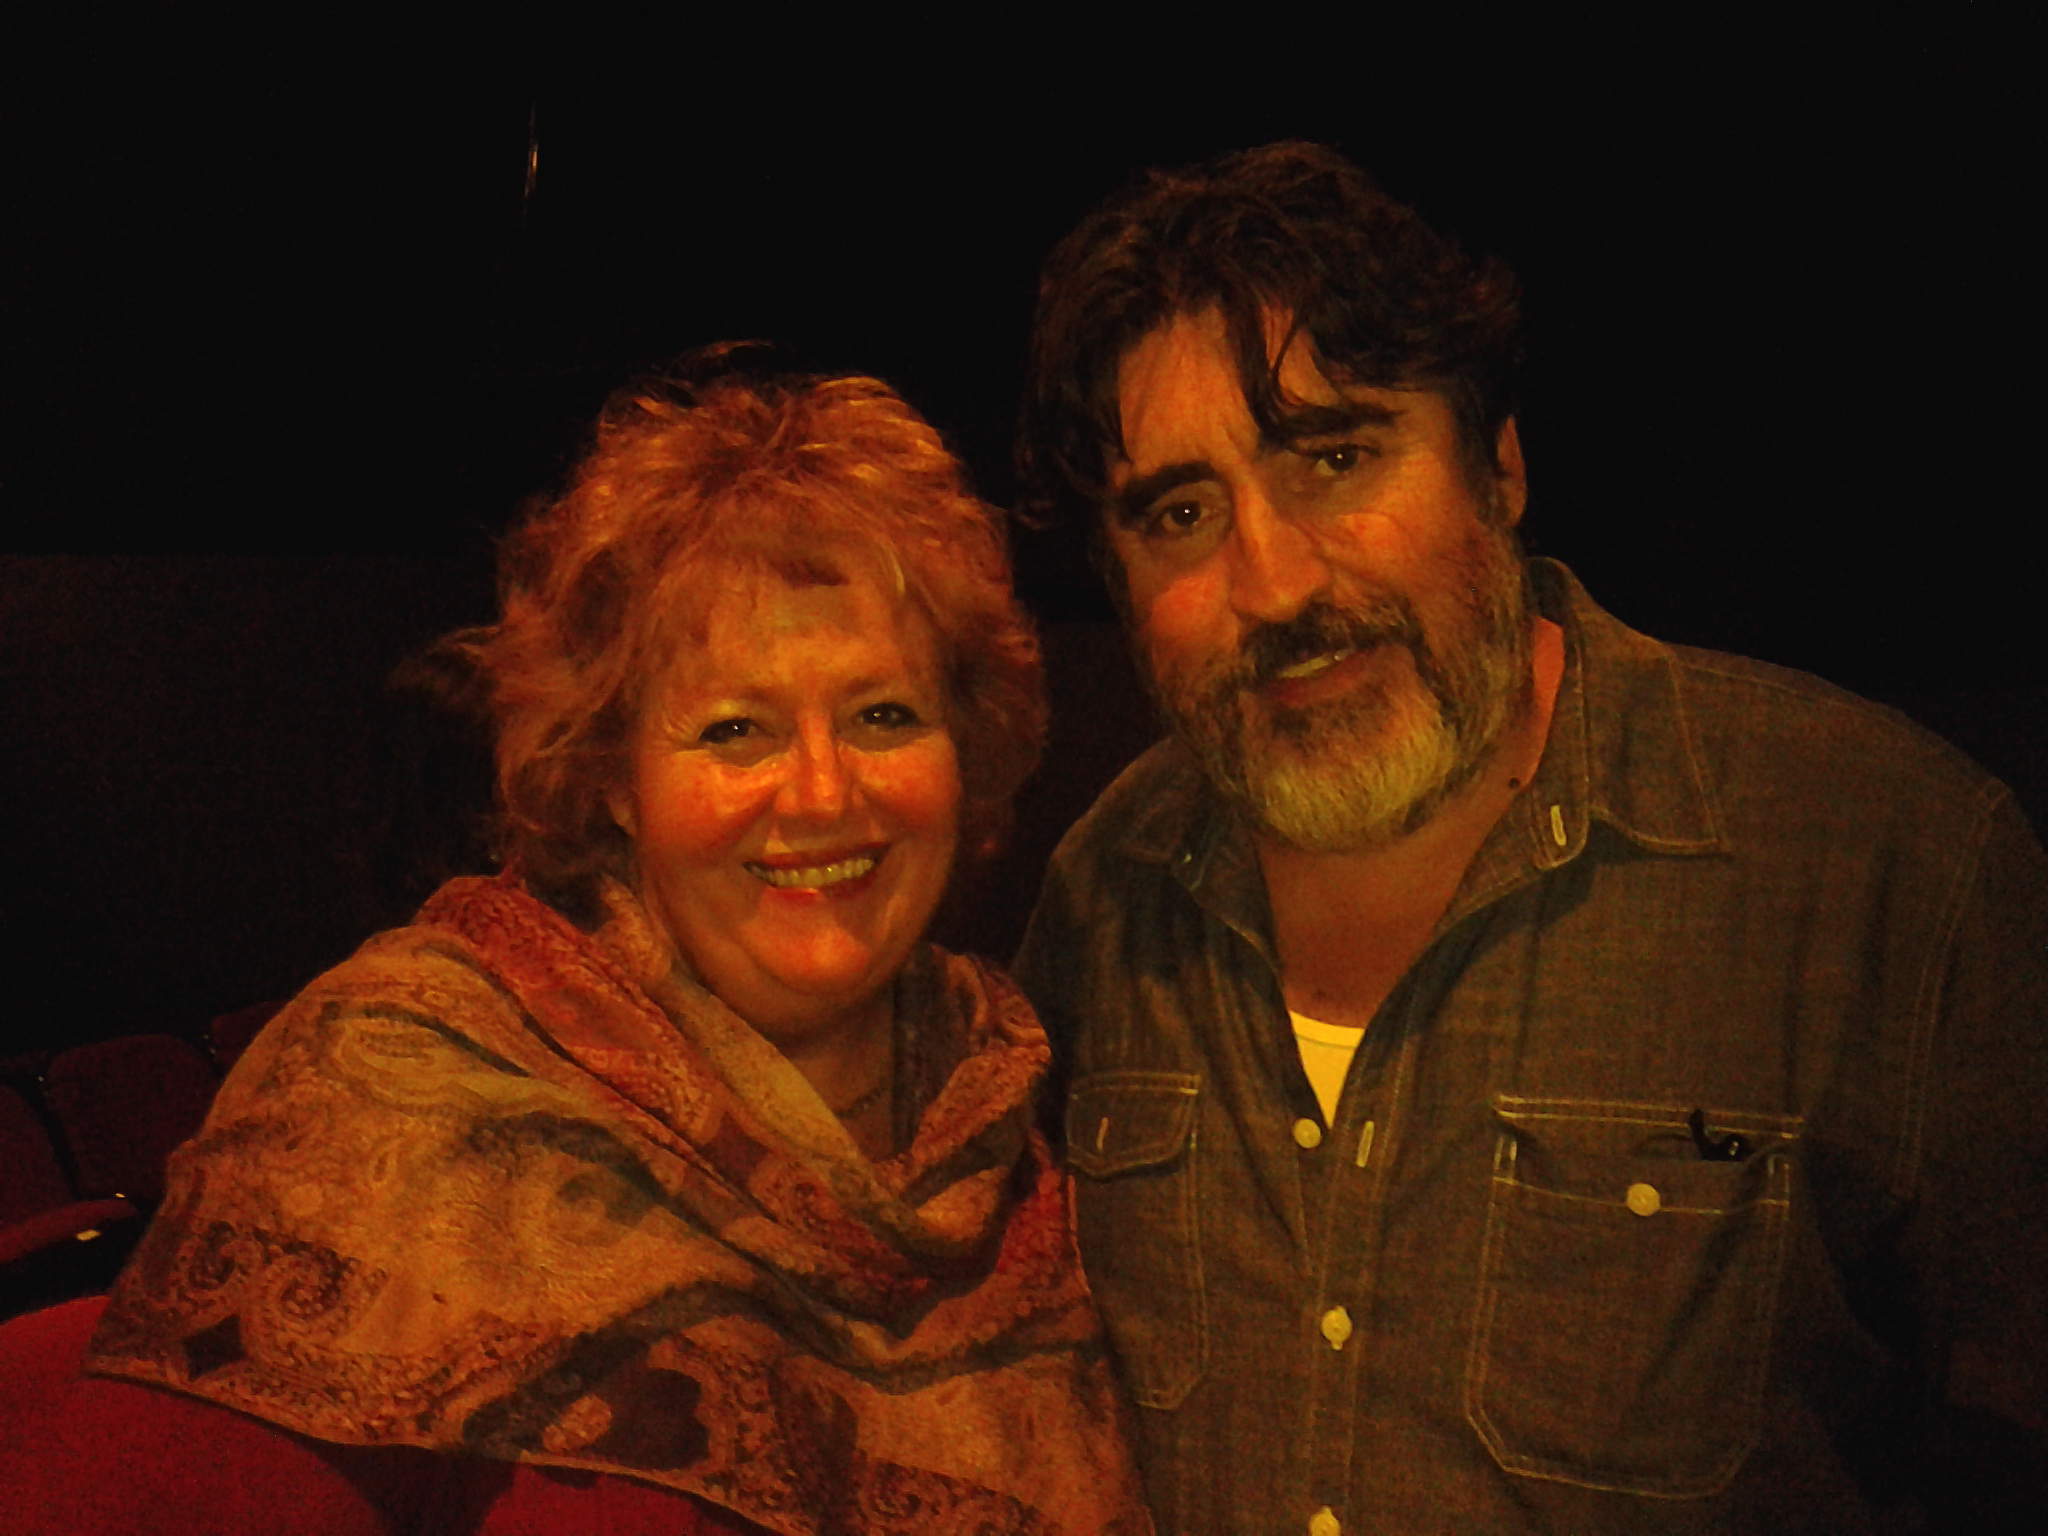 Tracy Weisert with the amazing Alfred Molina